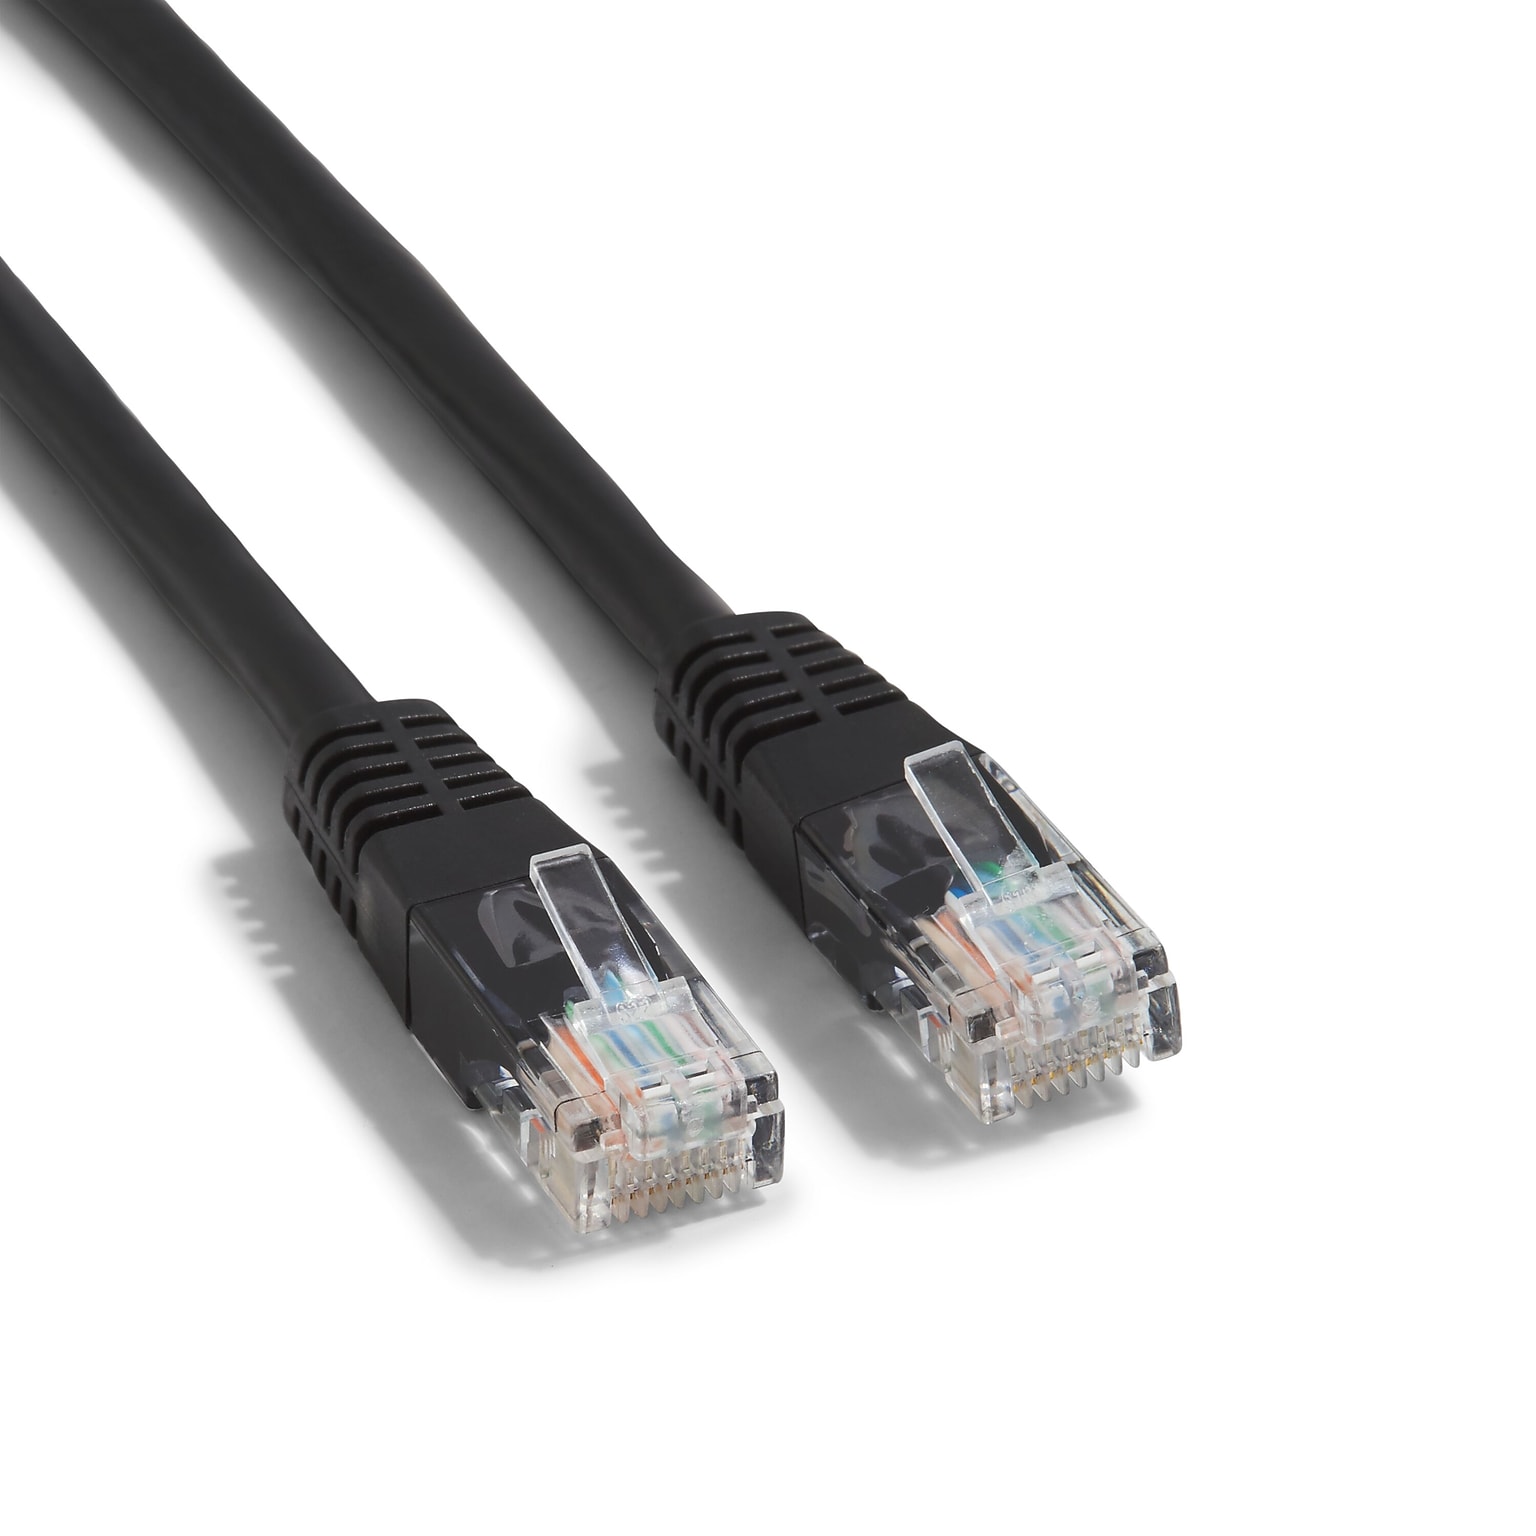 NXT Technologies™ NX29778 25 CAT-6 Cable, Black